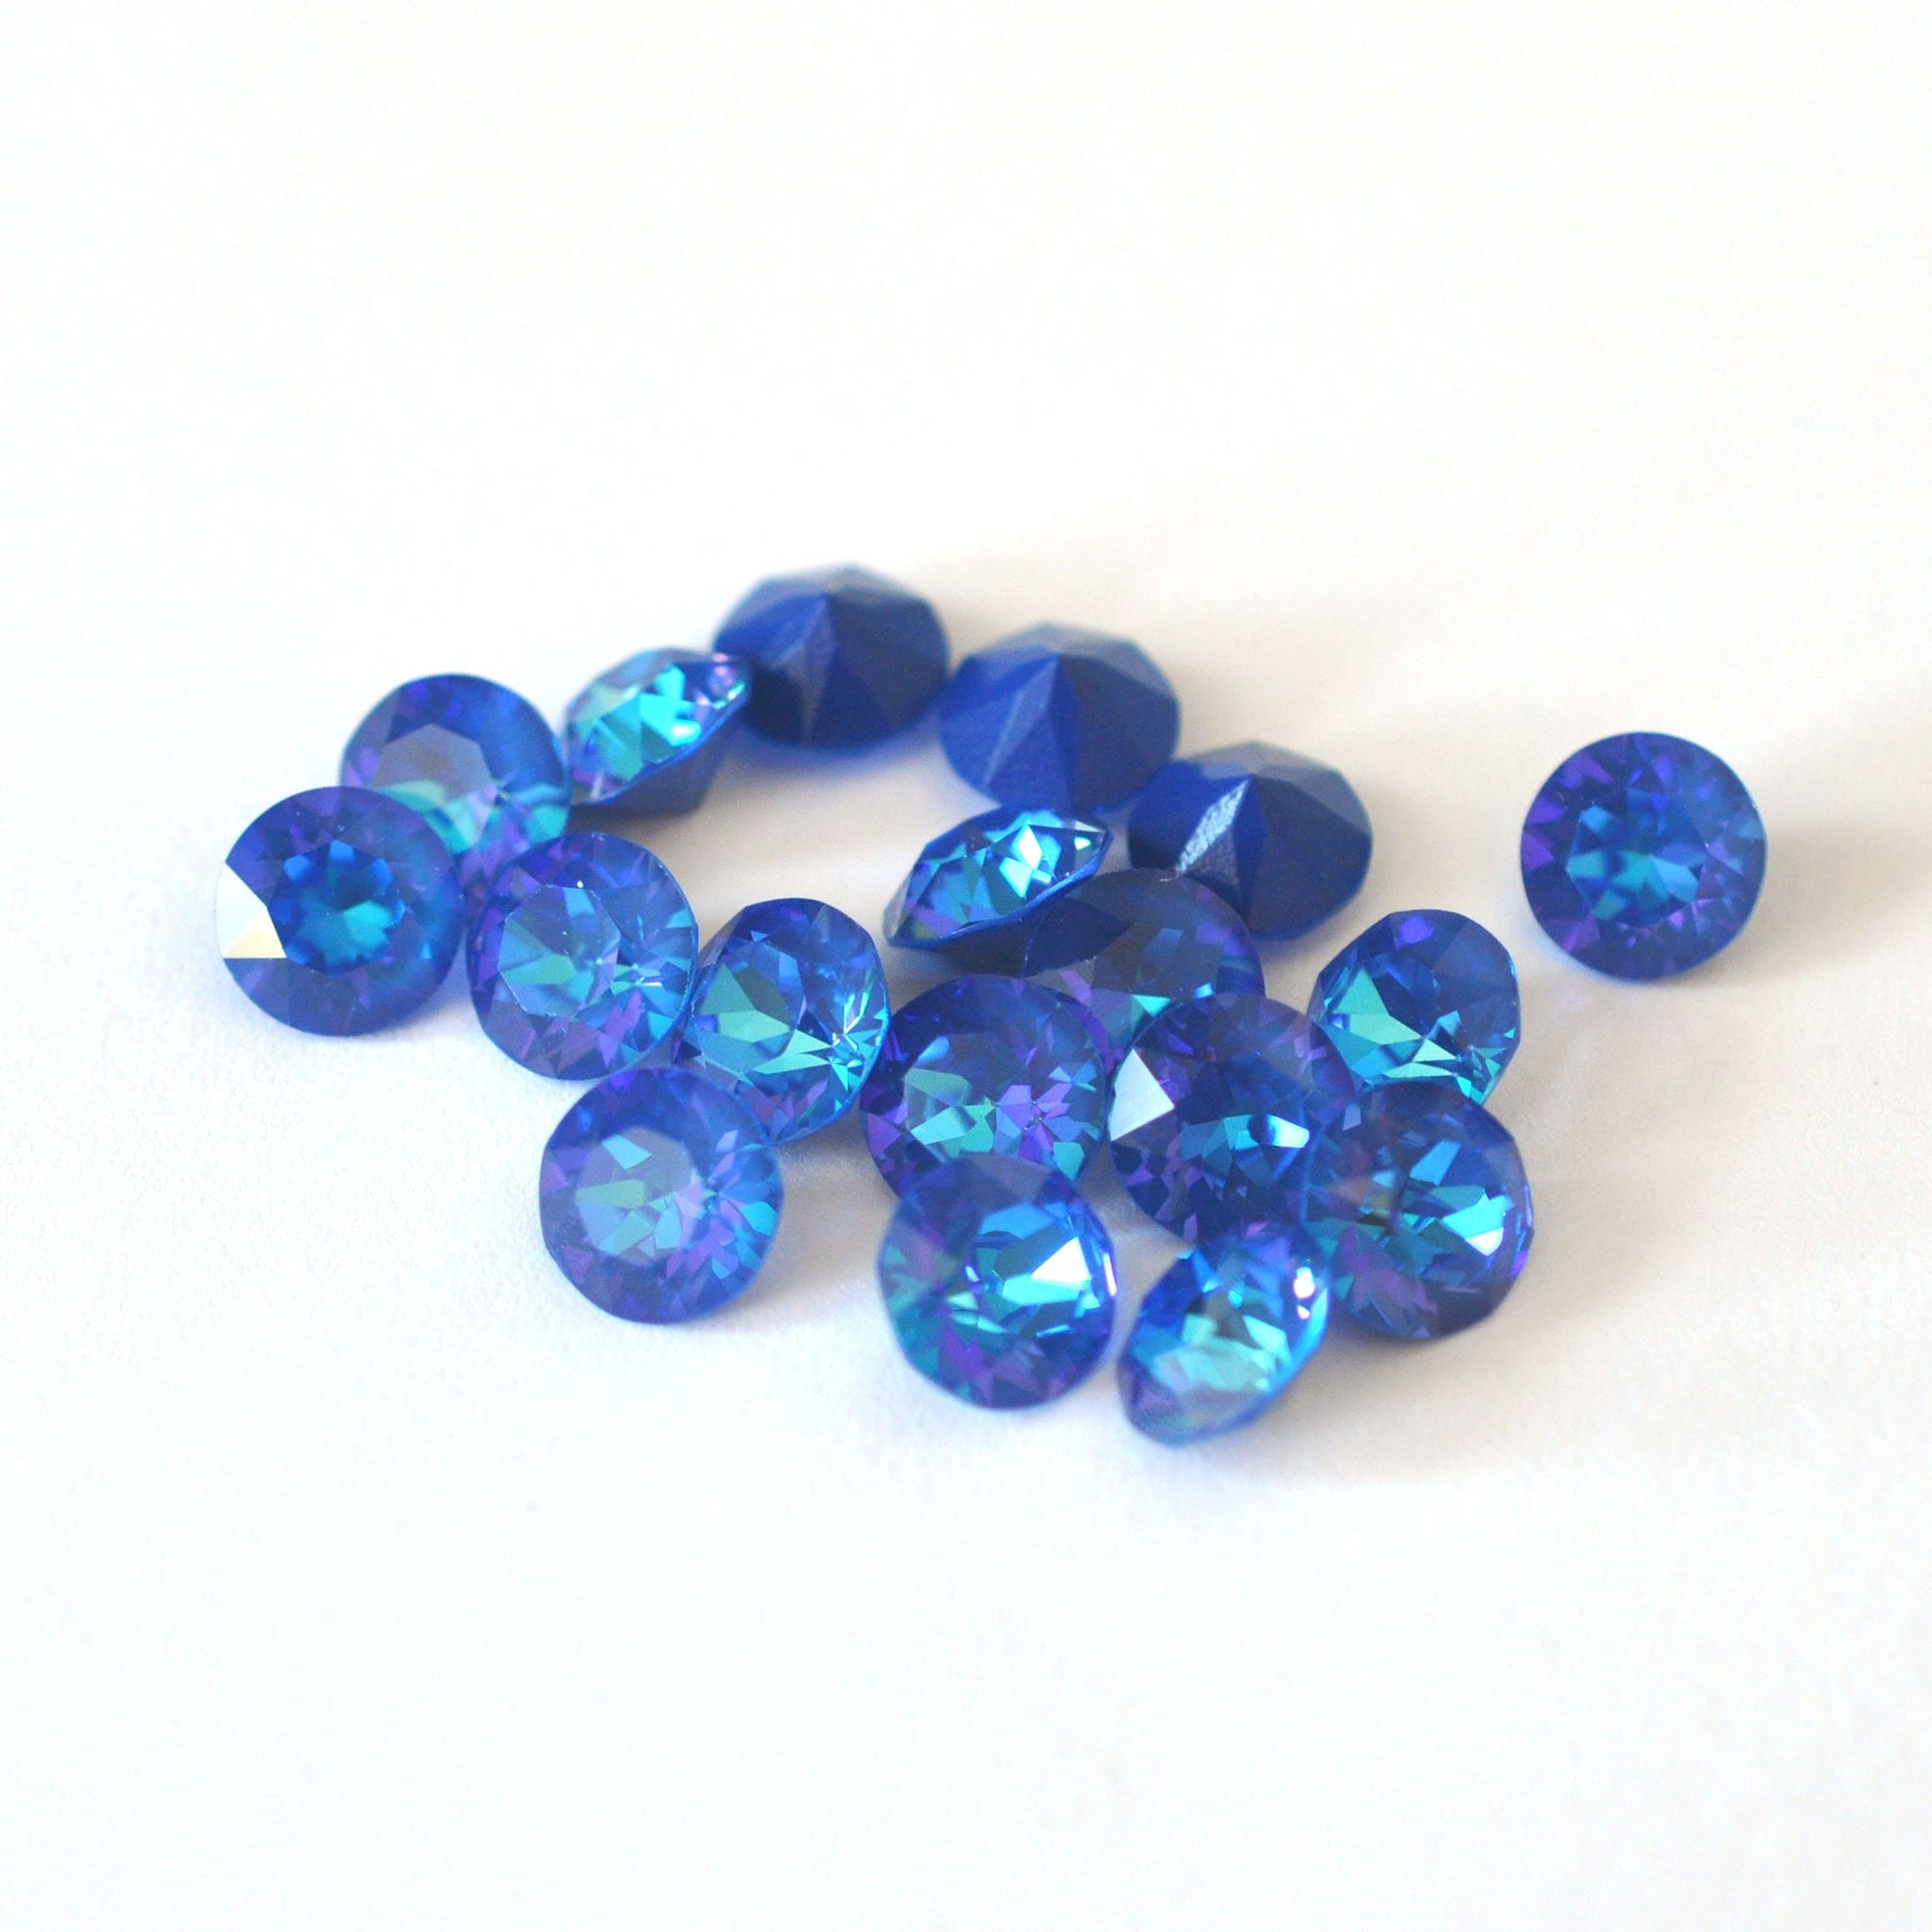 Royal Blue Delite 1088 Pointed Back Chaton Barton Crystal 39ss, 8mm